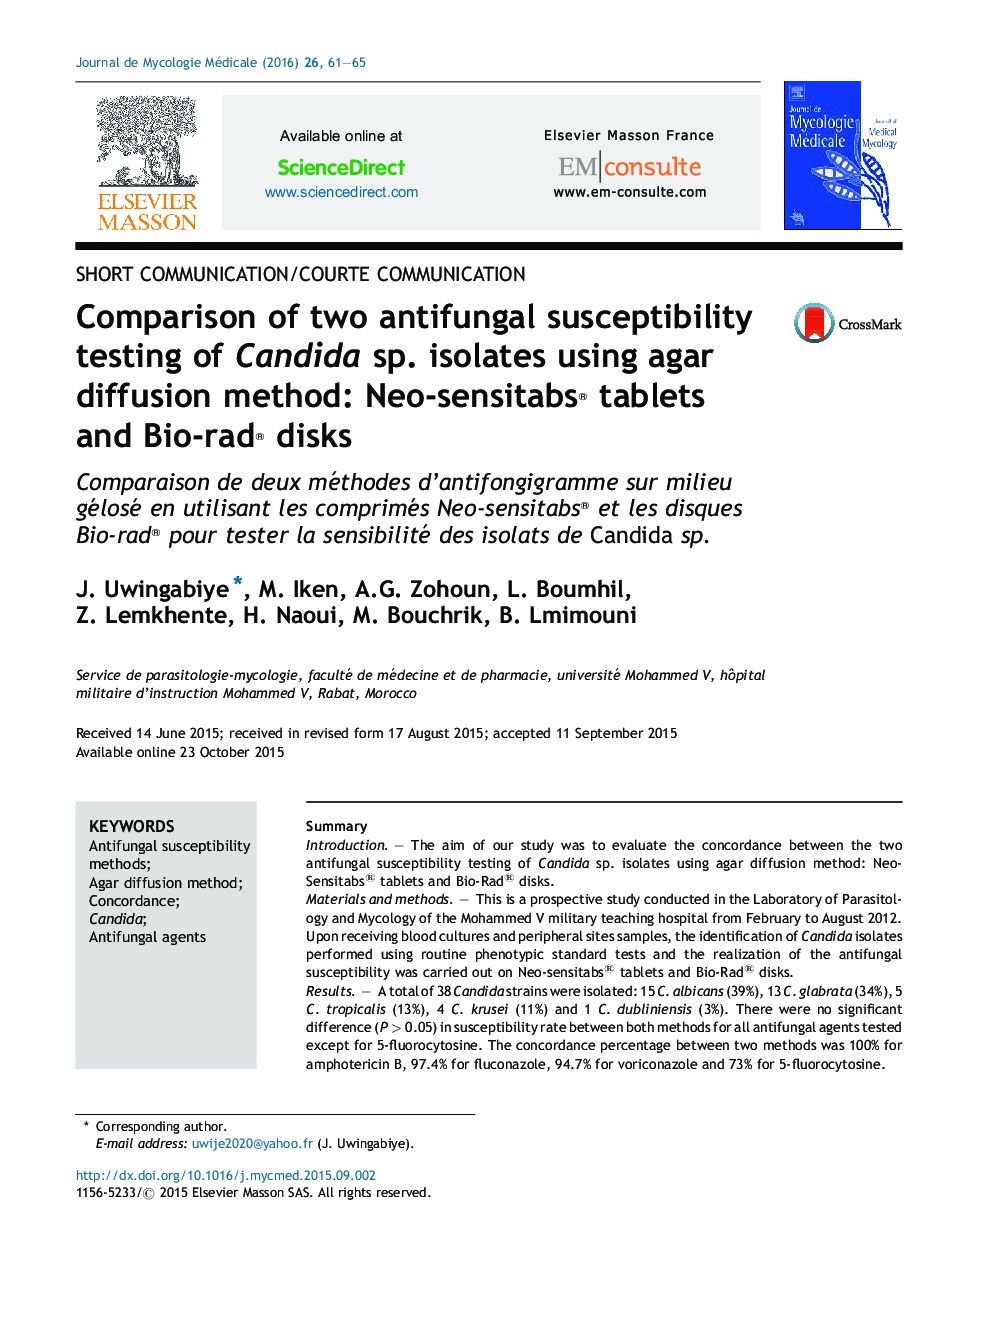 Comparison of two antifungal susceptibility testing of Candida sp. isolates using agar diffusion method: Neo-sensitabs® tablets and Bio-rad® disks